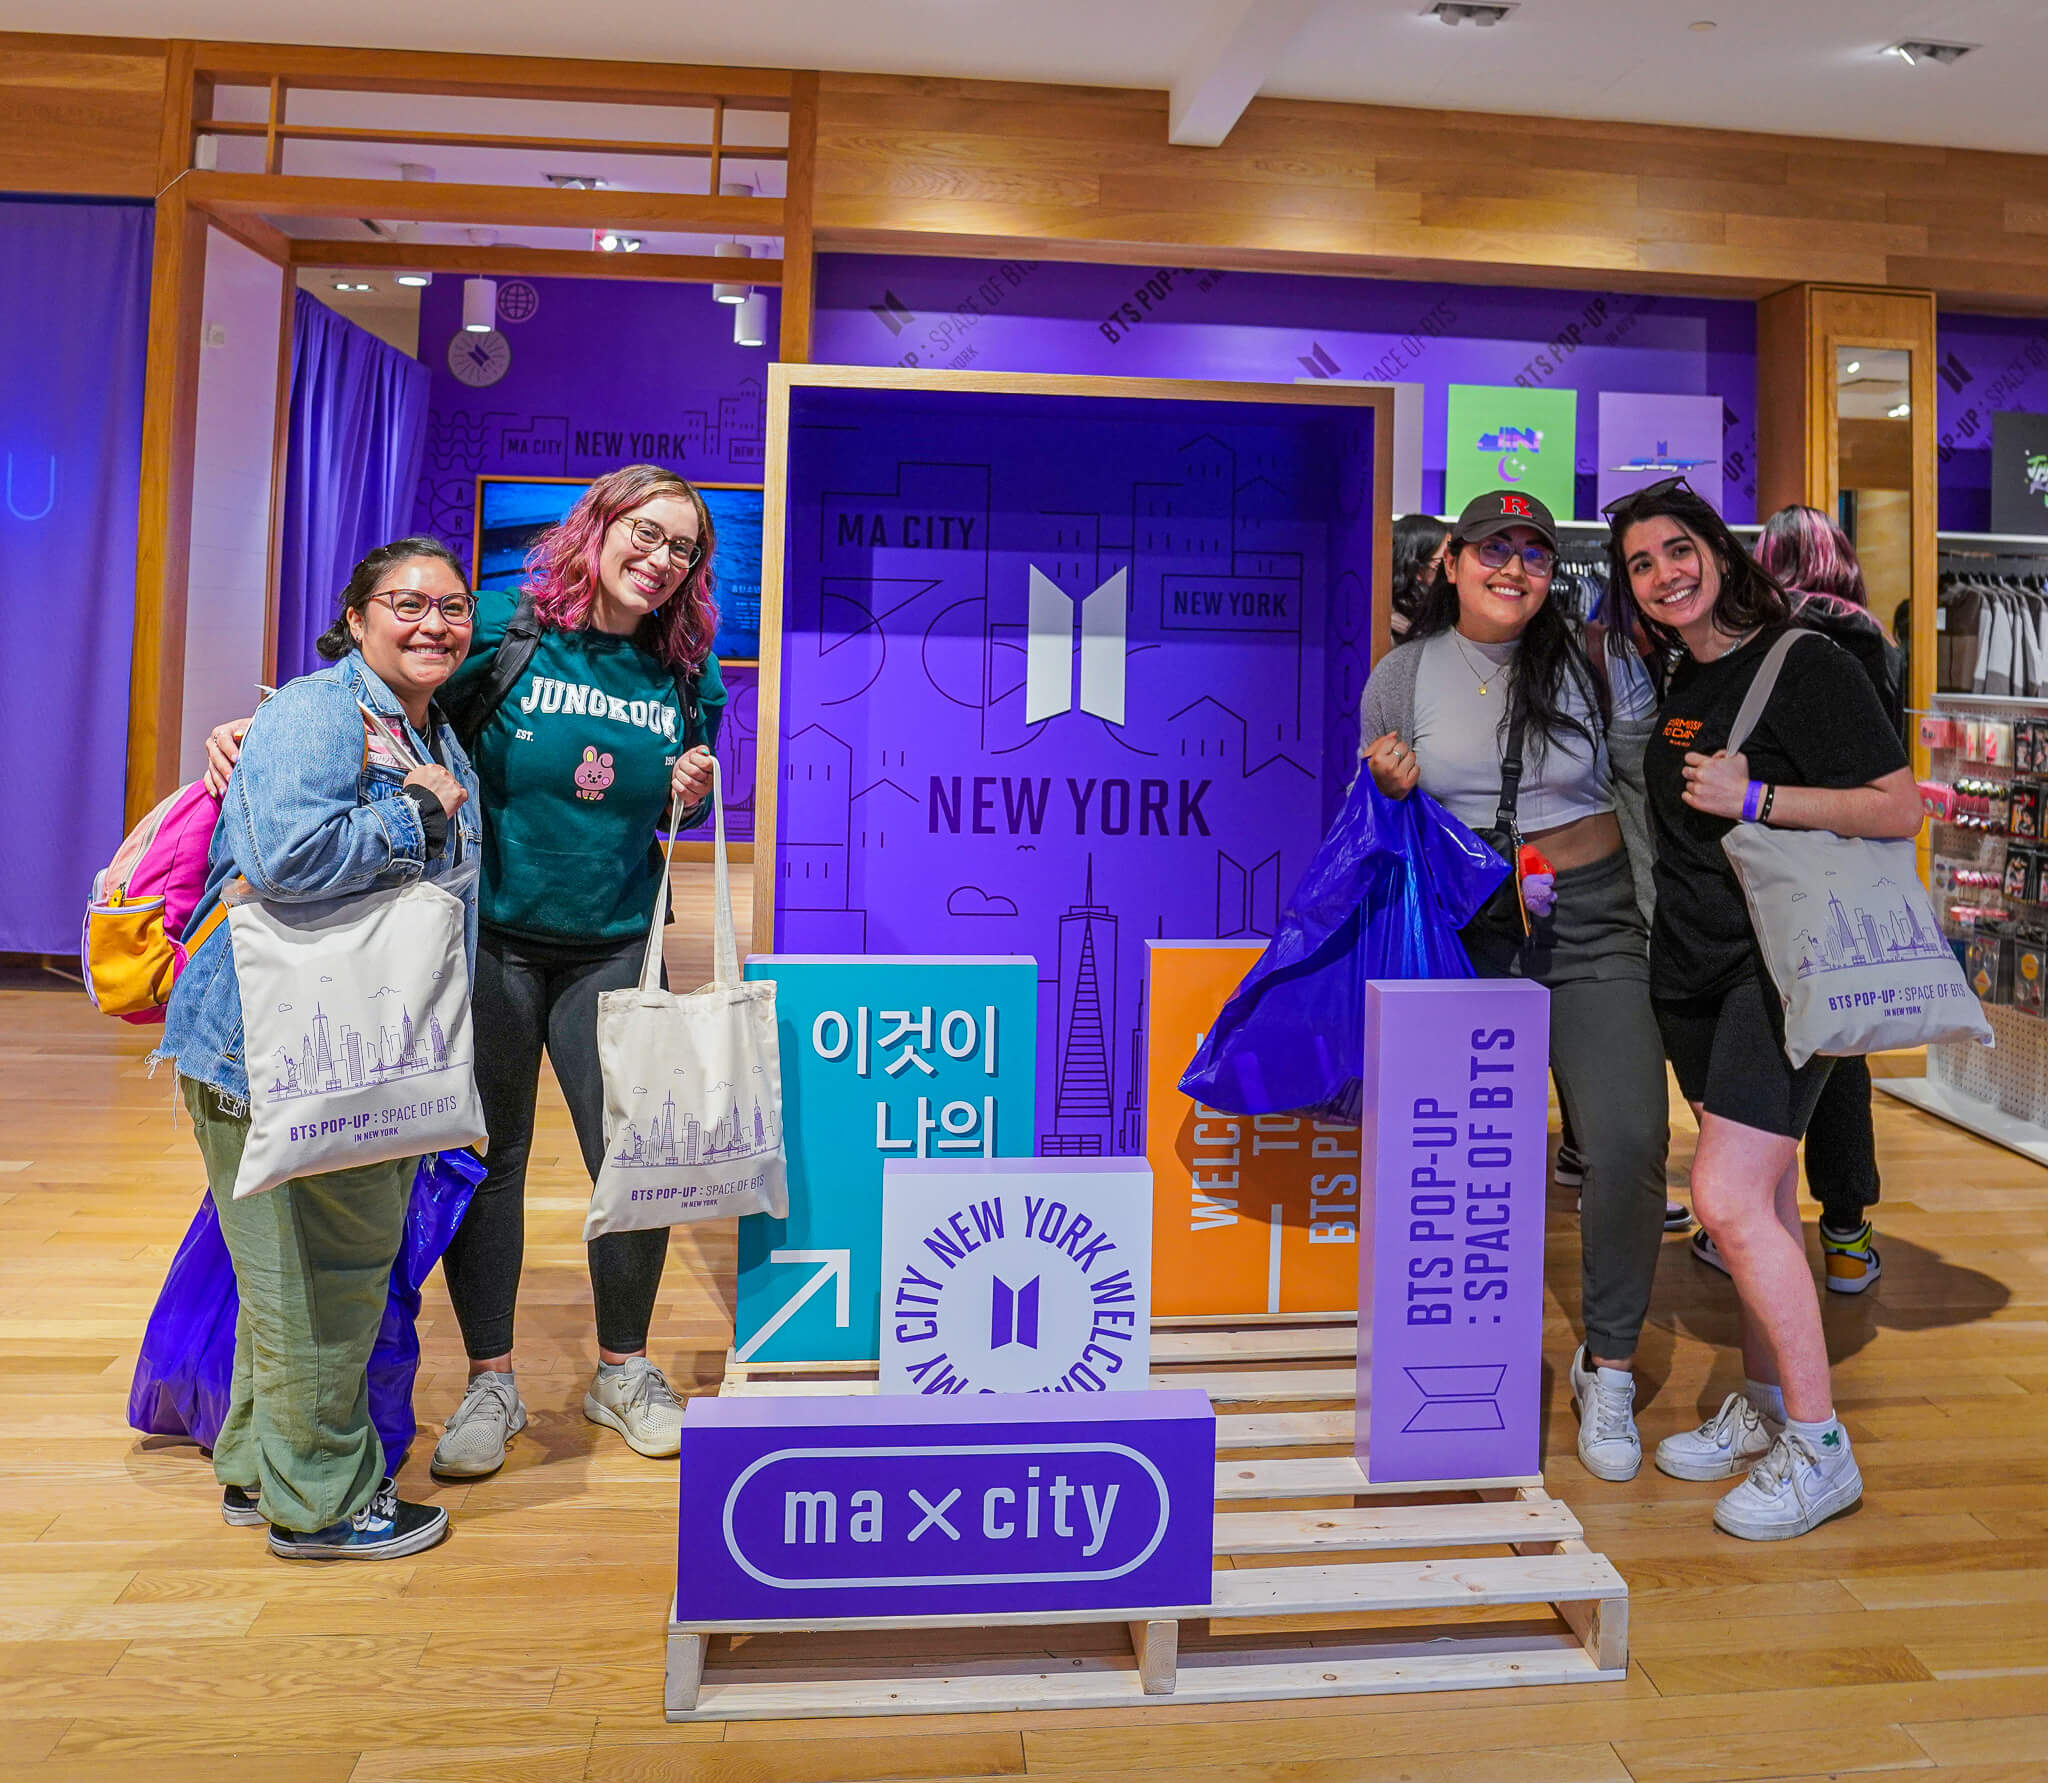 All about loving each other': BTS pop-up shop in Hudson Yards